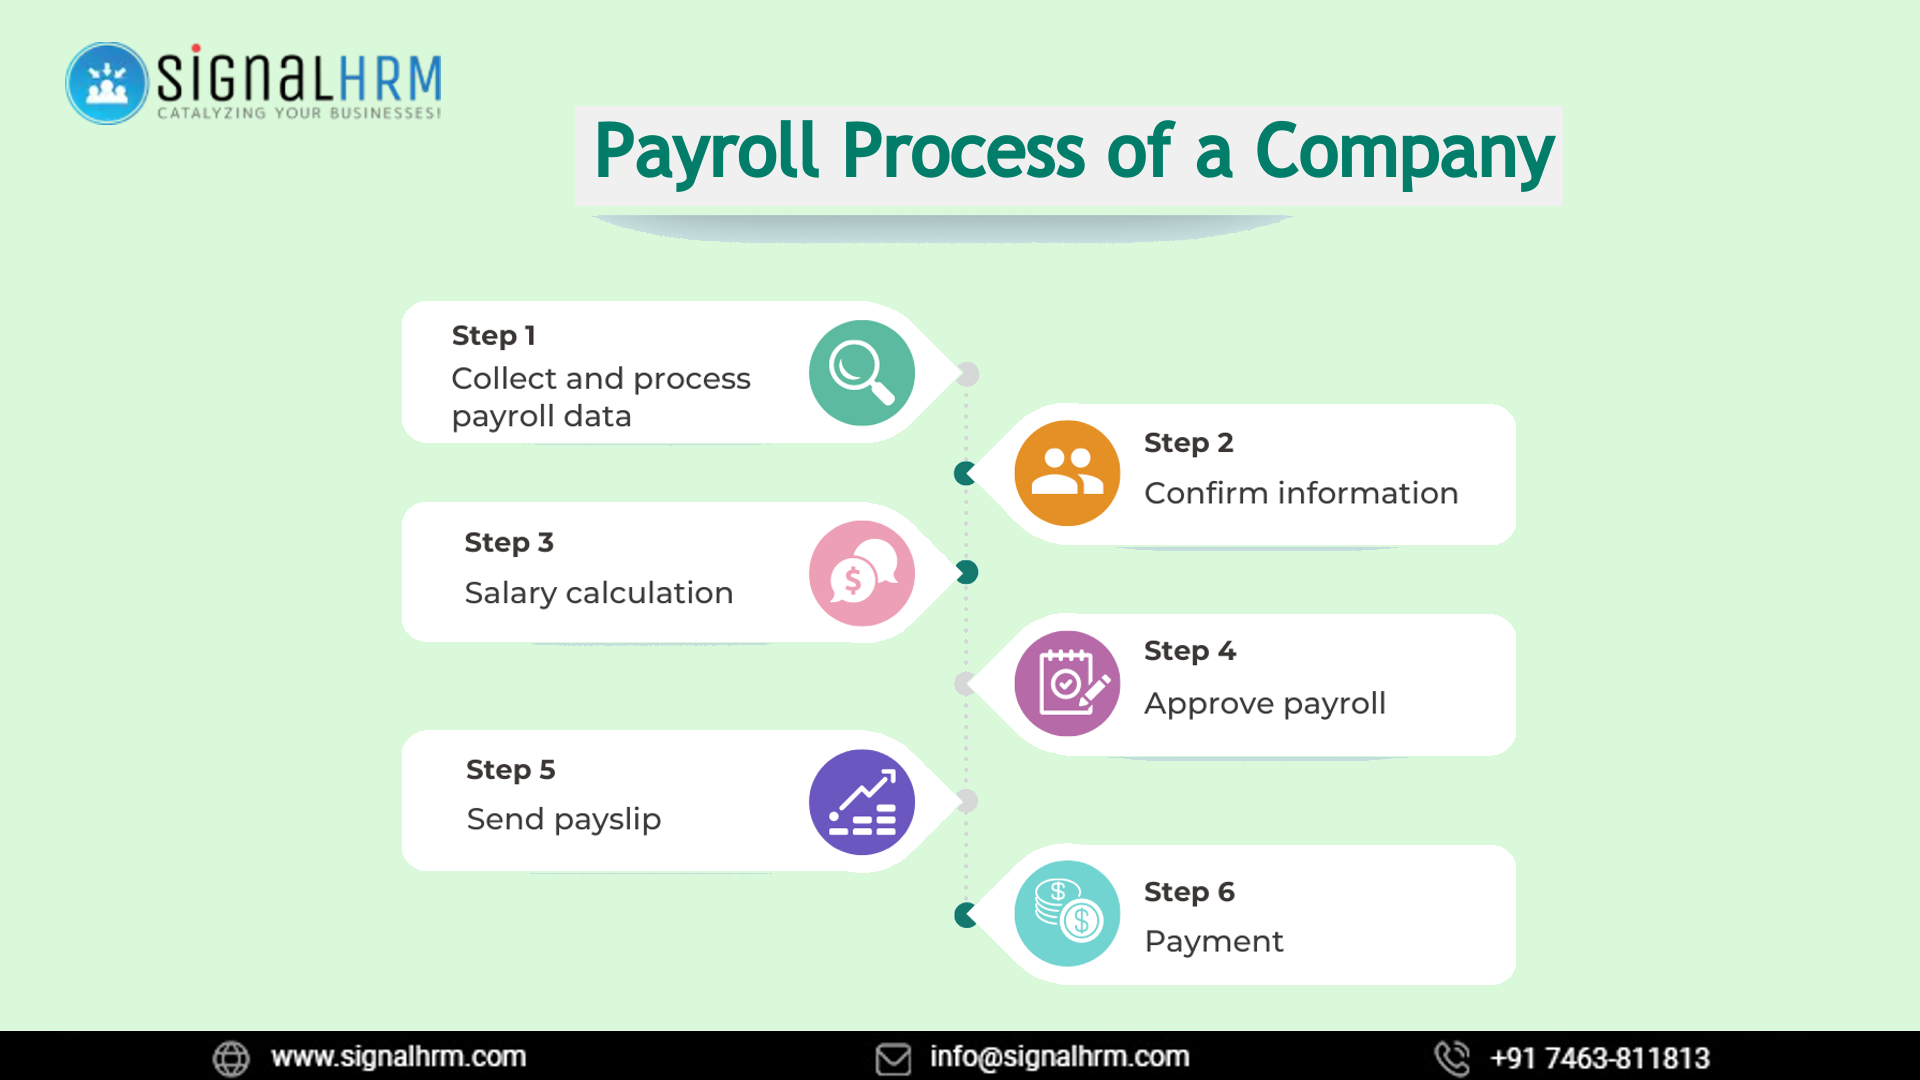 How to Improve the Payroll Process of a Company?